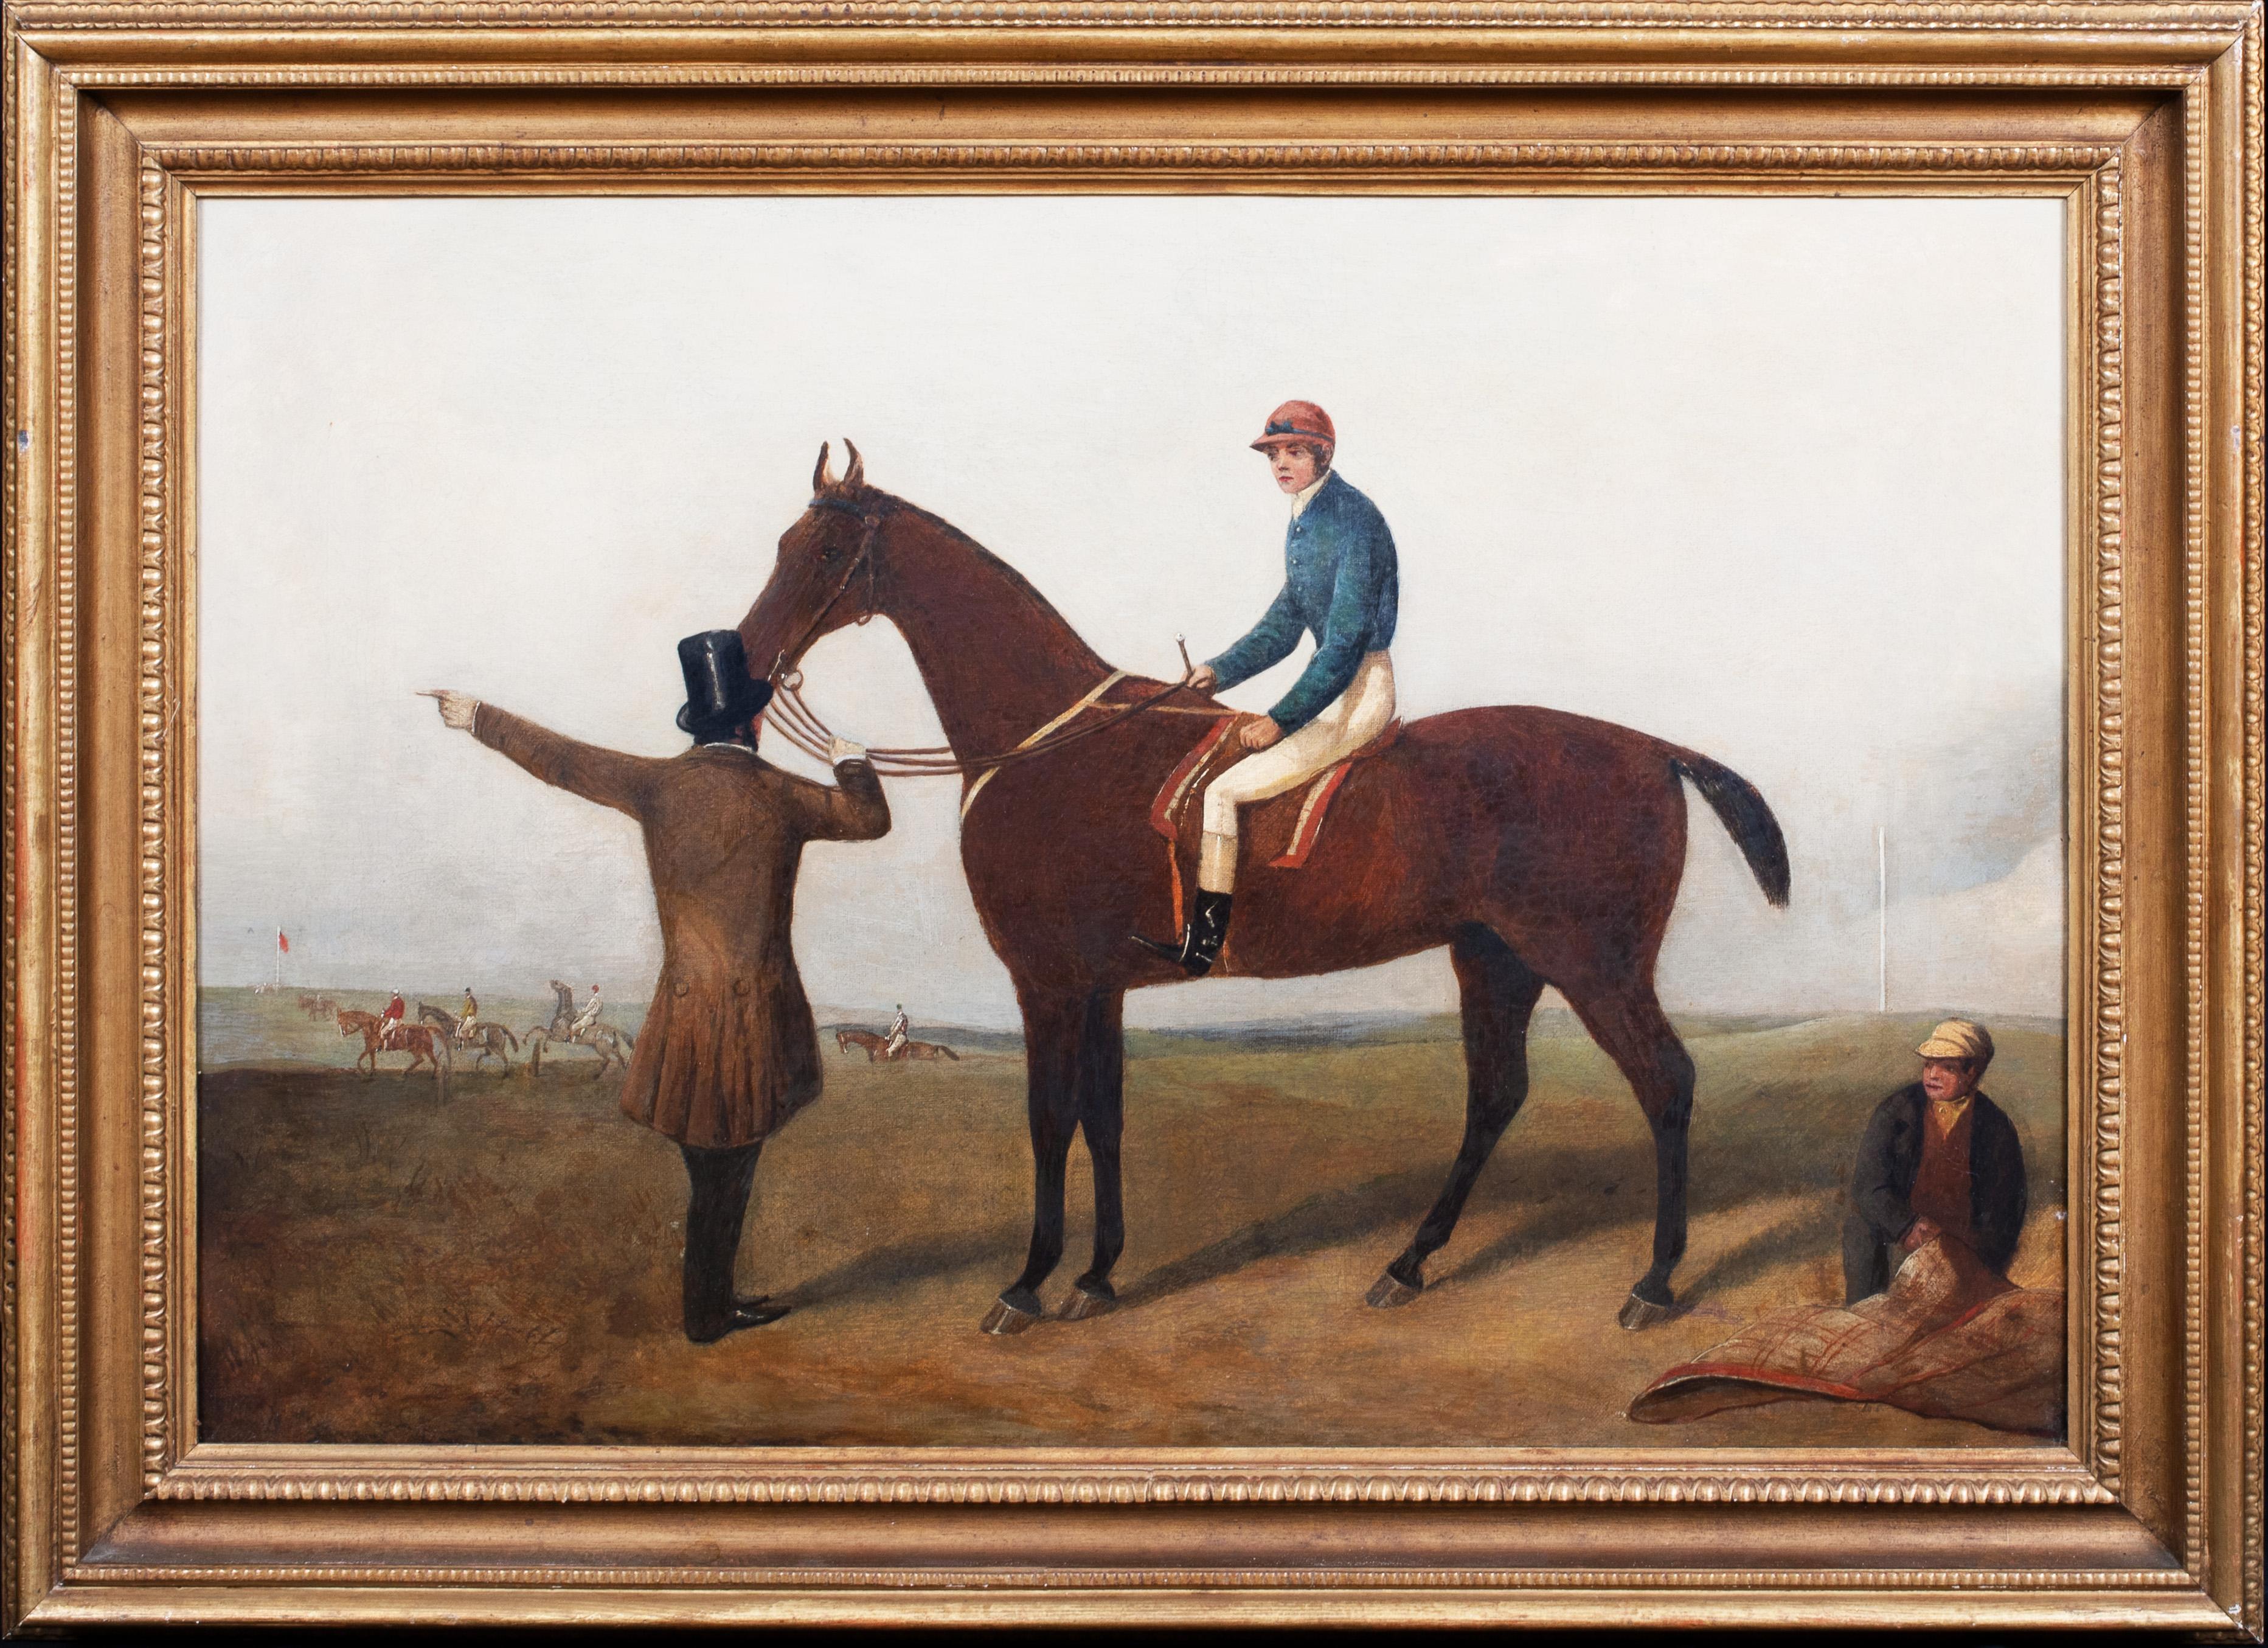 Racehorse, Jockey, Trainer and Groom, 19th Century - Painting by Unknown